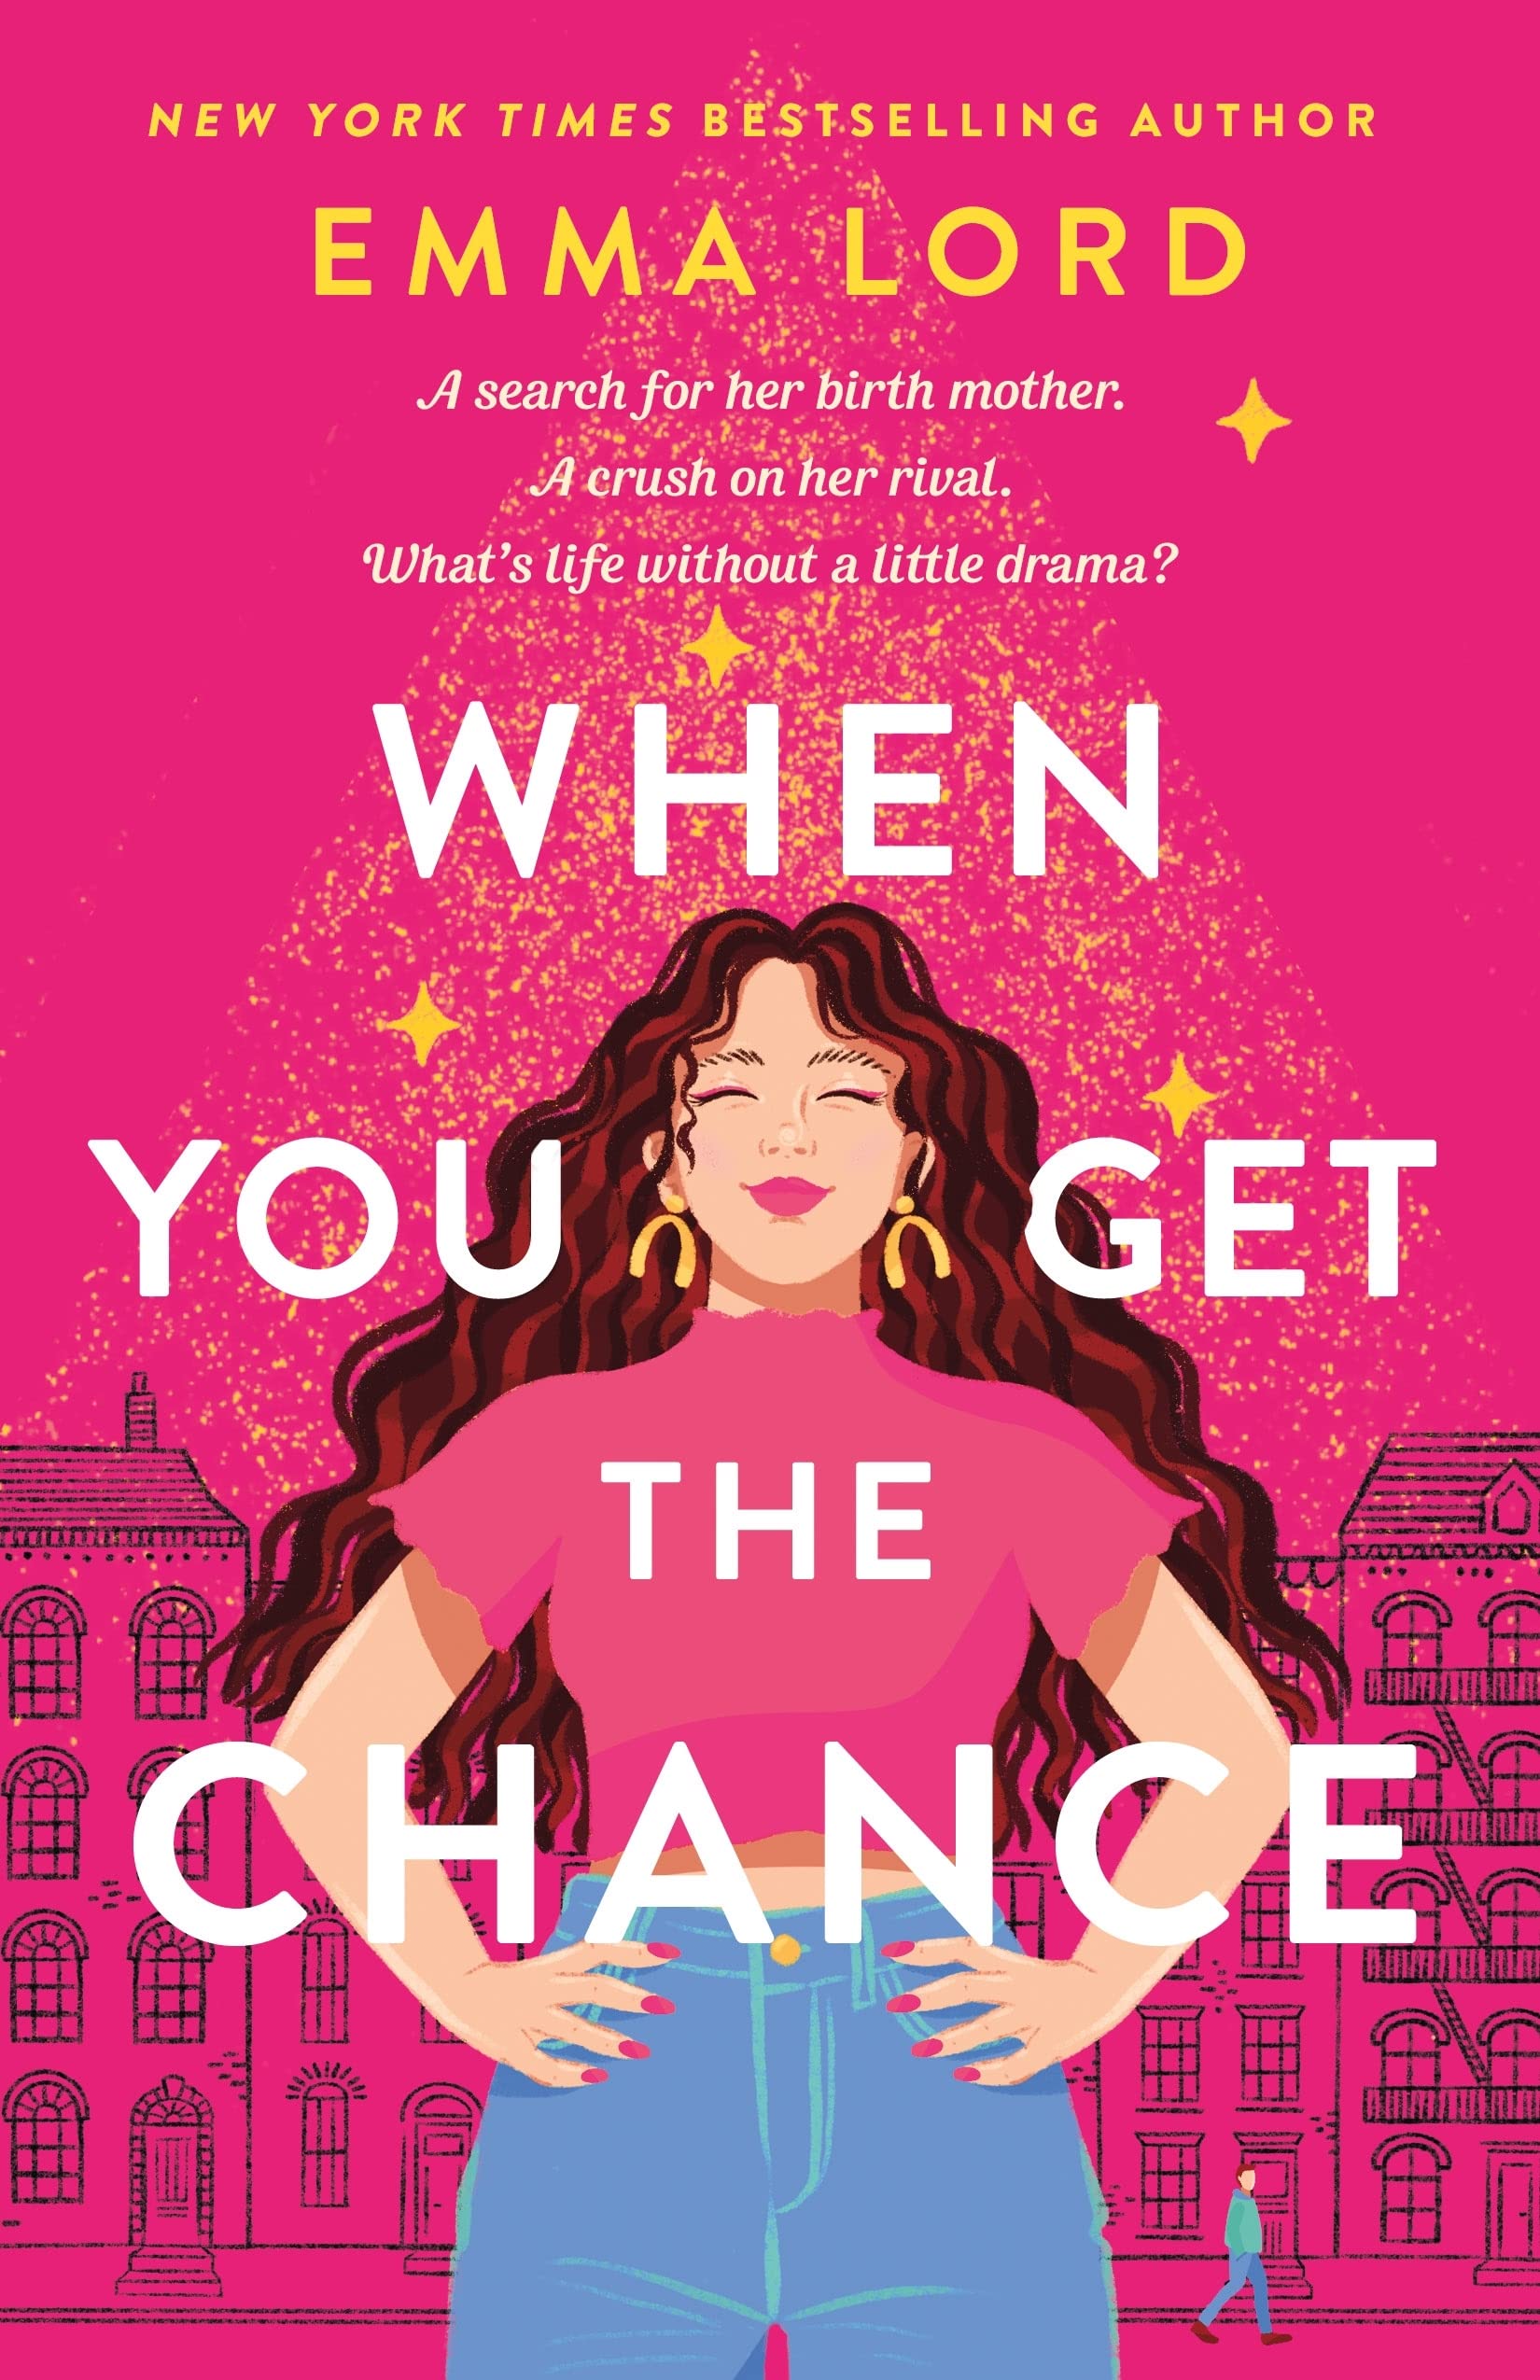 Cover of “When You Get the Chance” by Emma Lord